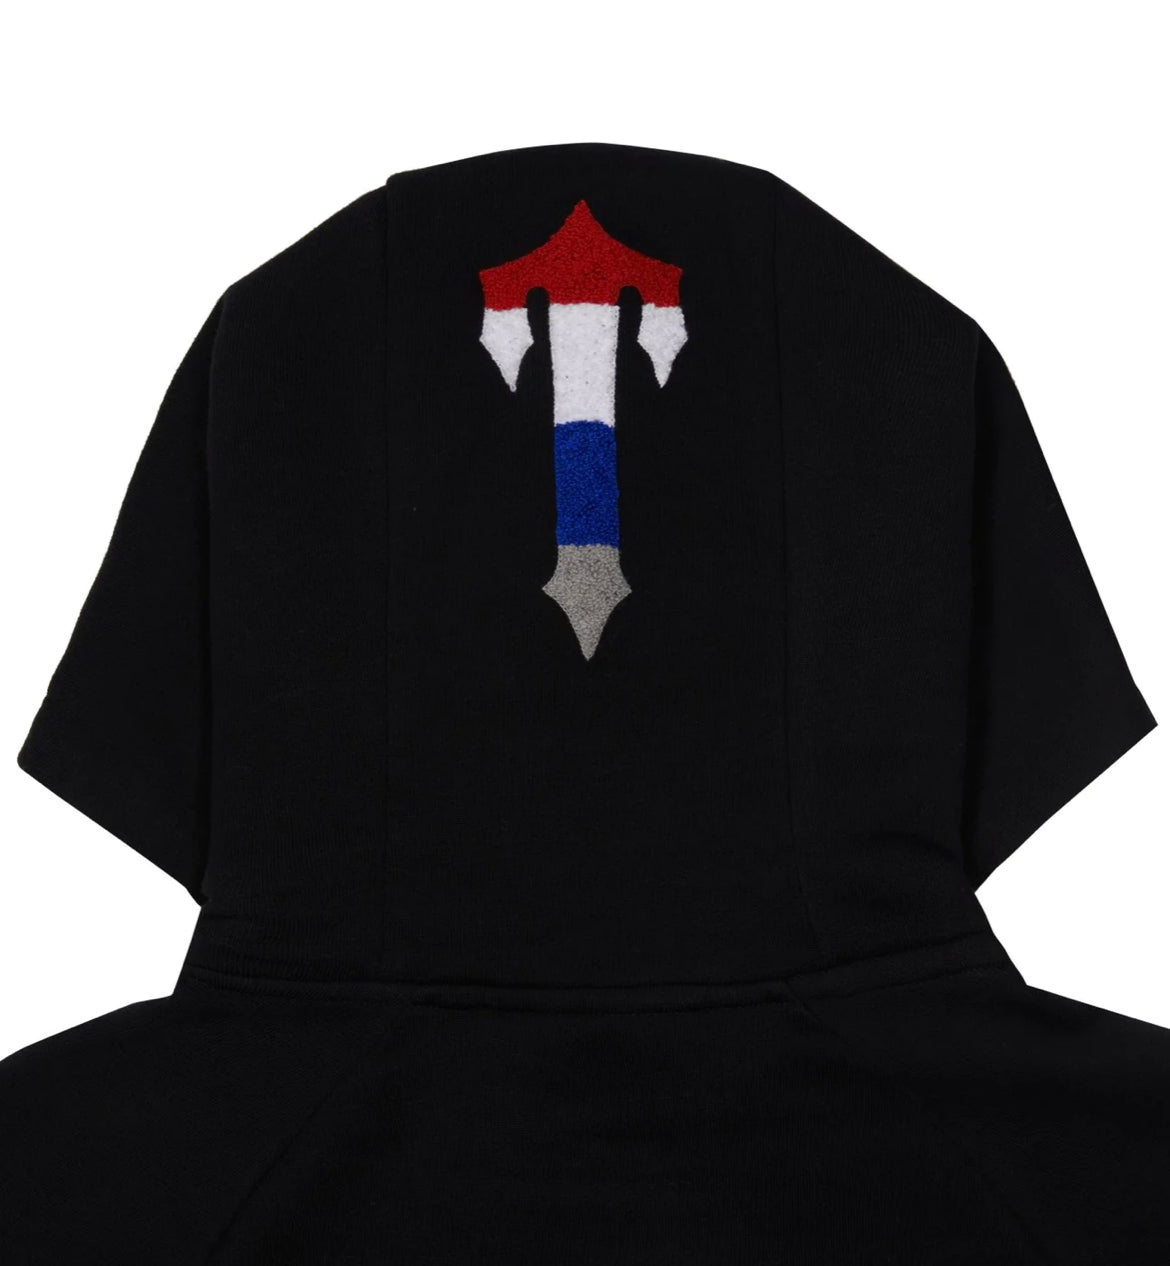 Trapstar Chenille Decoded 2.0 Hooded Tracksuit - BLACK REVOLUTION EDITION (FAST DELIVERY)